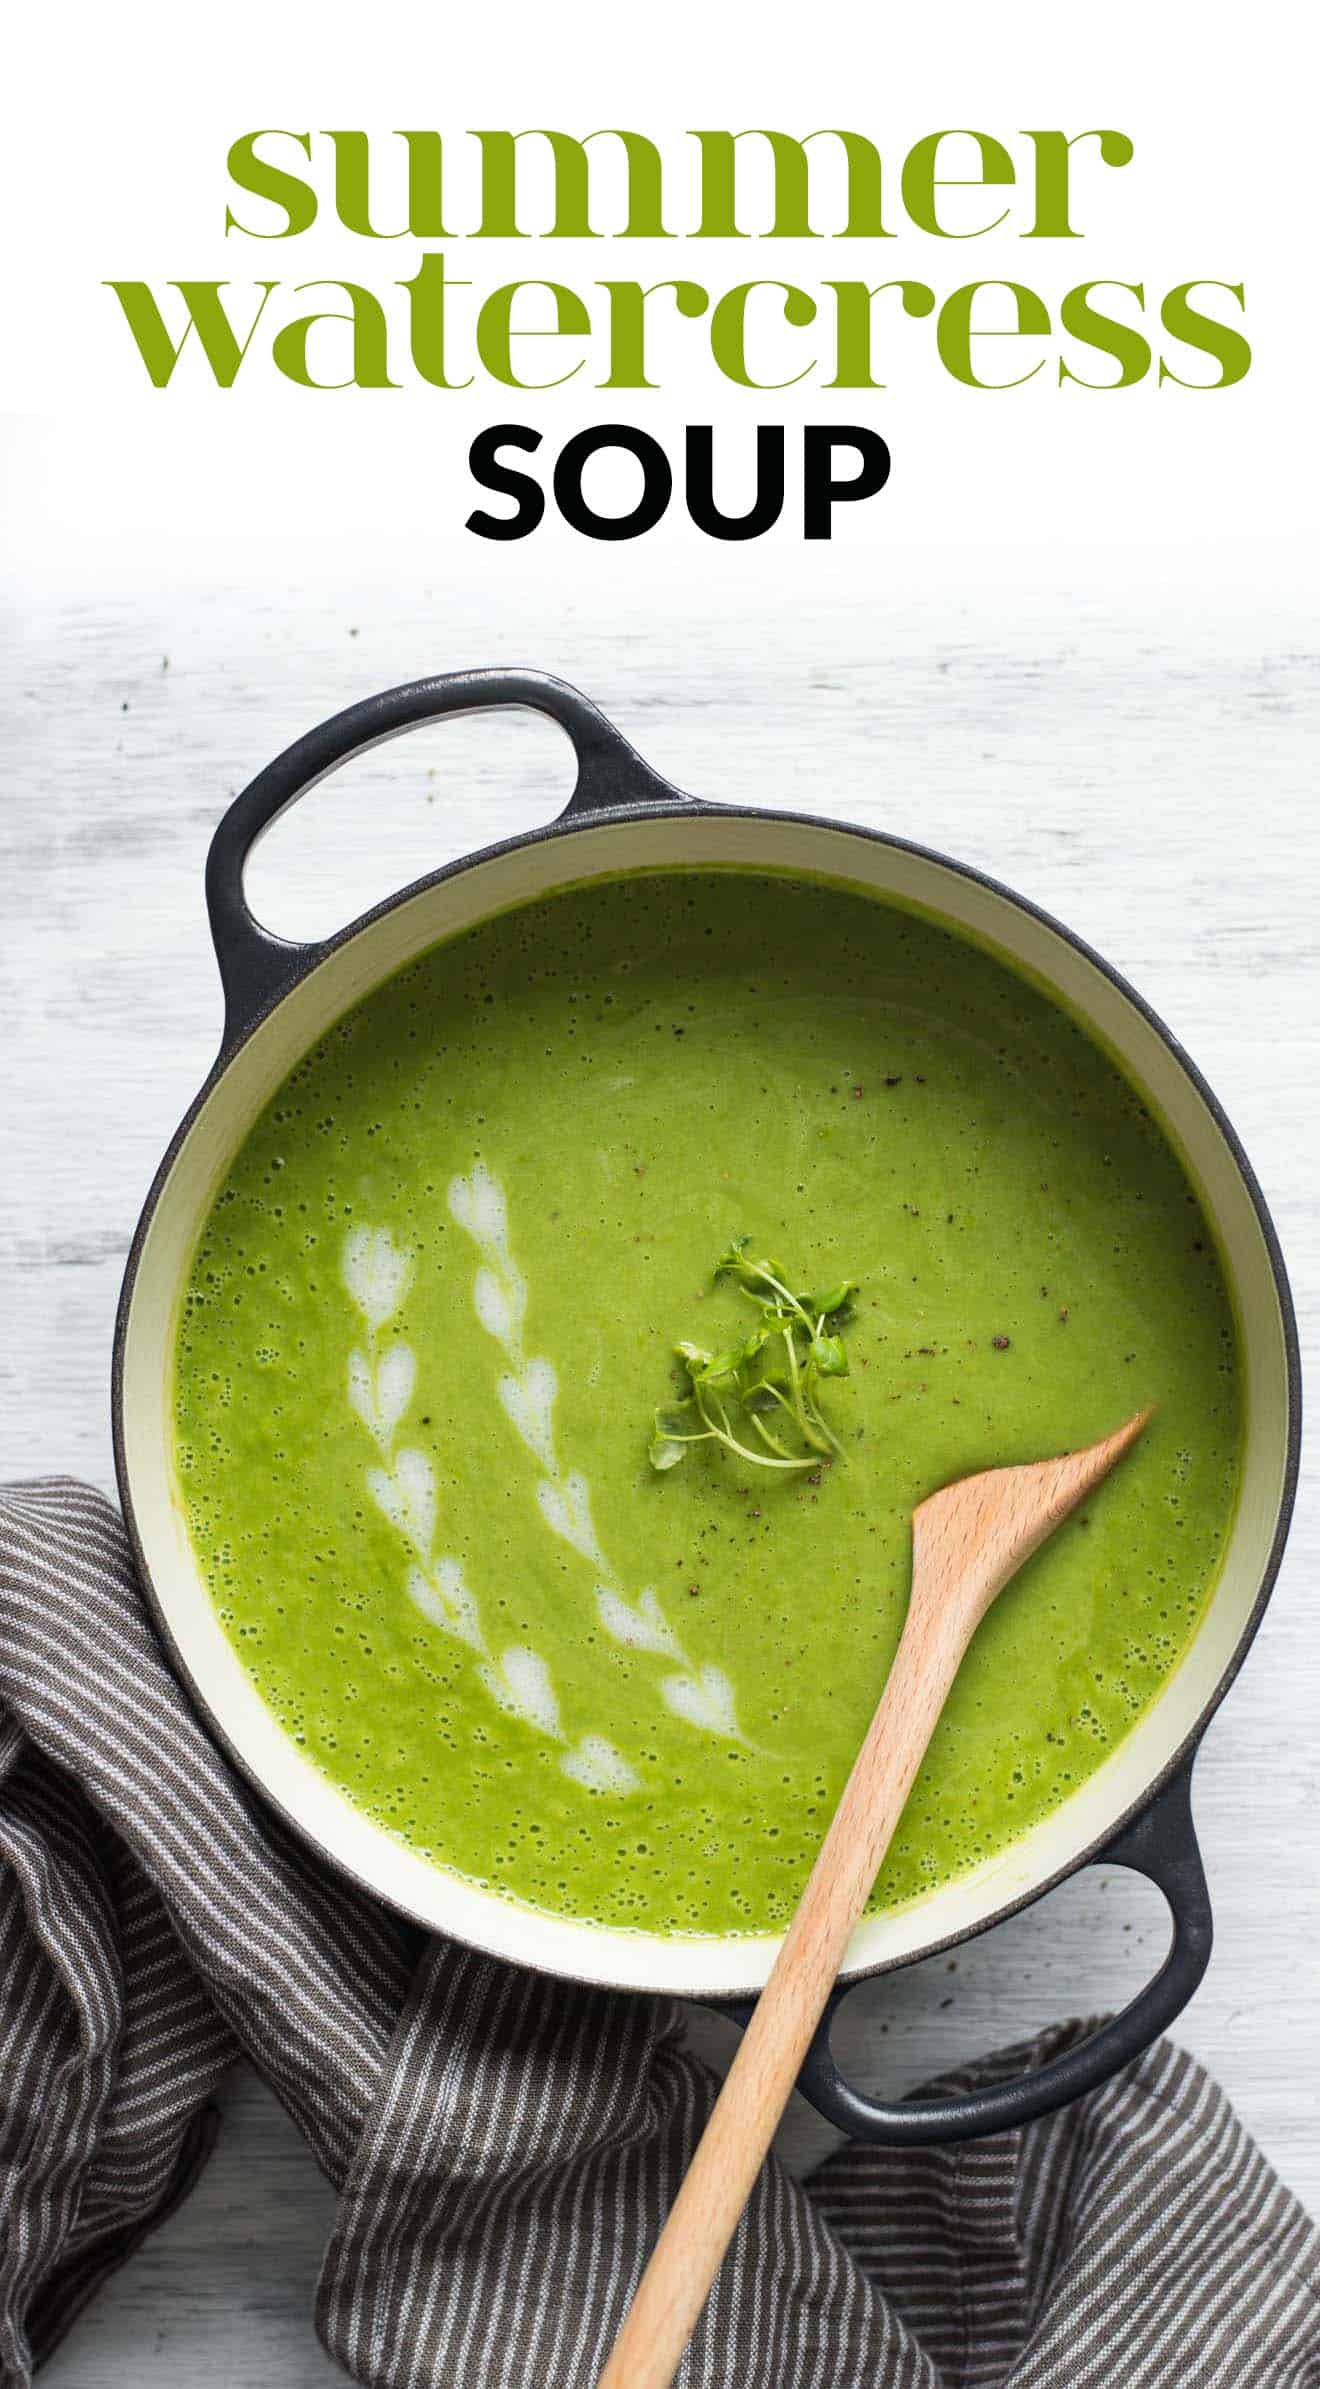 Easy Watercress Soup with Potatoes, Peas, Ginger, and Basil - it's a healthy summer soup that's also gluten free! by @healthynibs